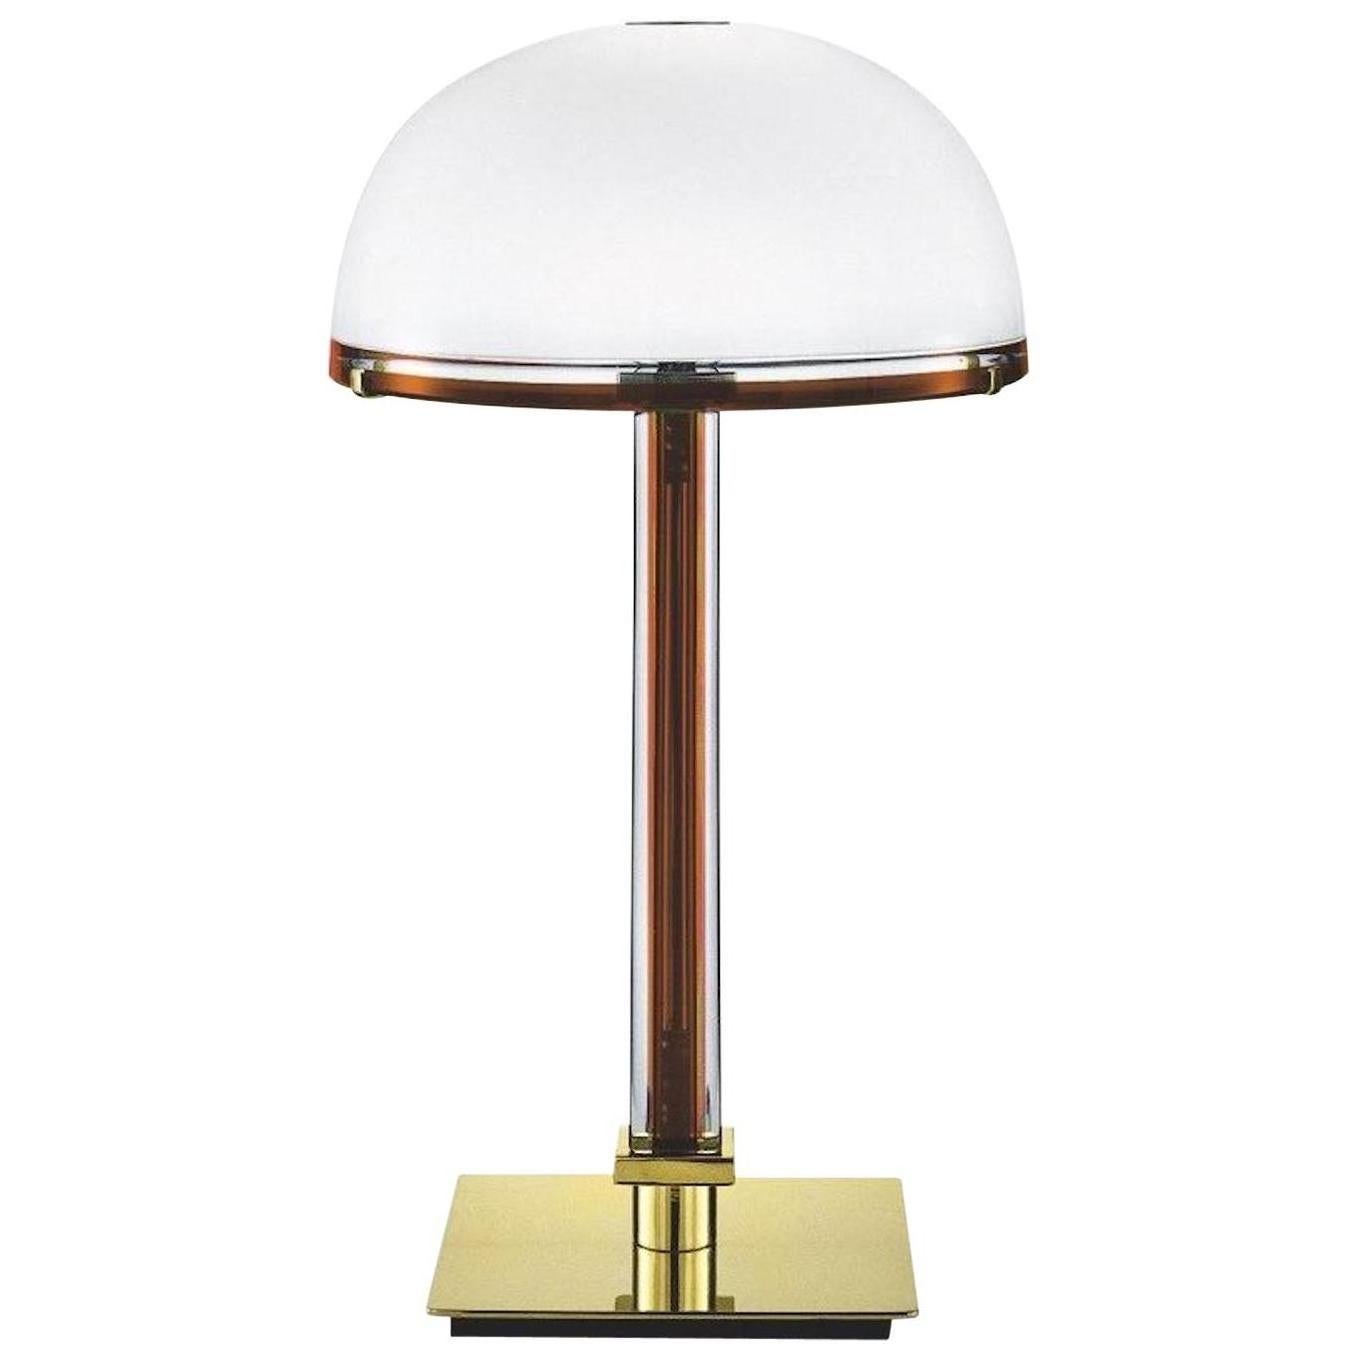 Belboi Tavolo Table lamp, designed and manufactured by Venini, features an handmade blown glass top with gold-plated metal finishes. Adds a pop of a color to any desk or table. Light source: One max 150 W E14 Dimmer. Indoor use only.

Dimensions: